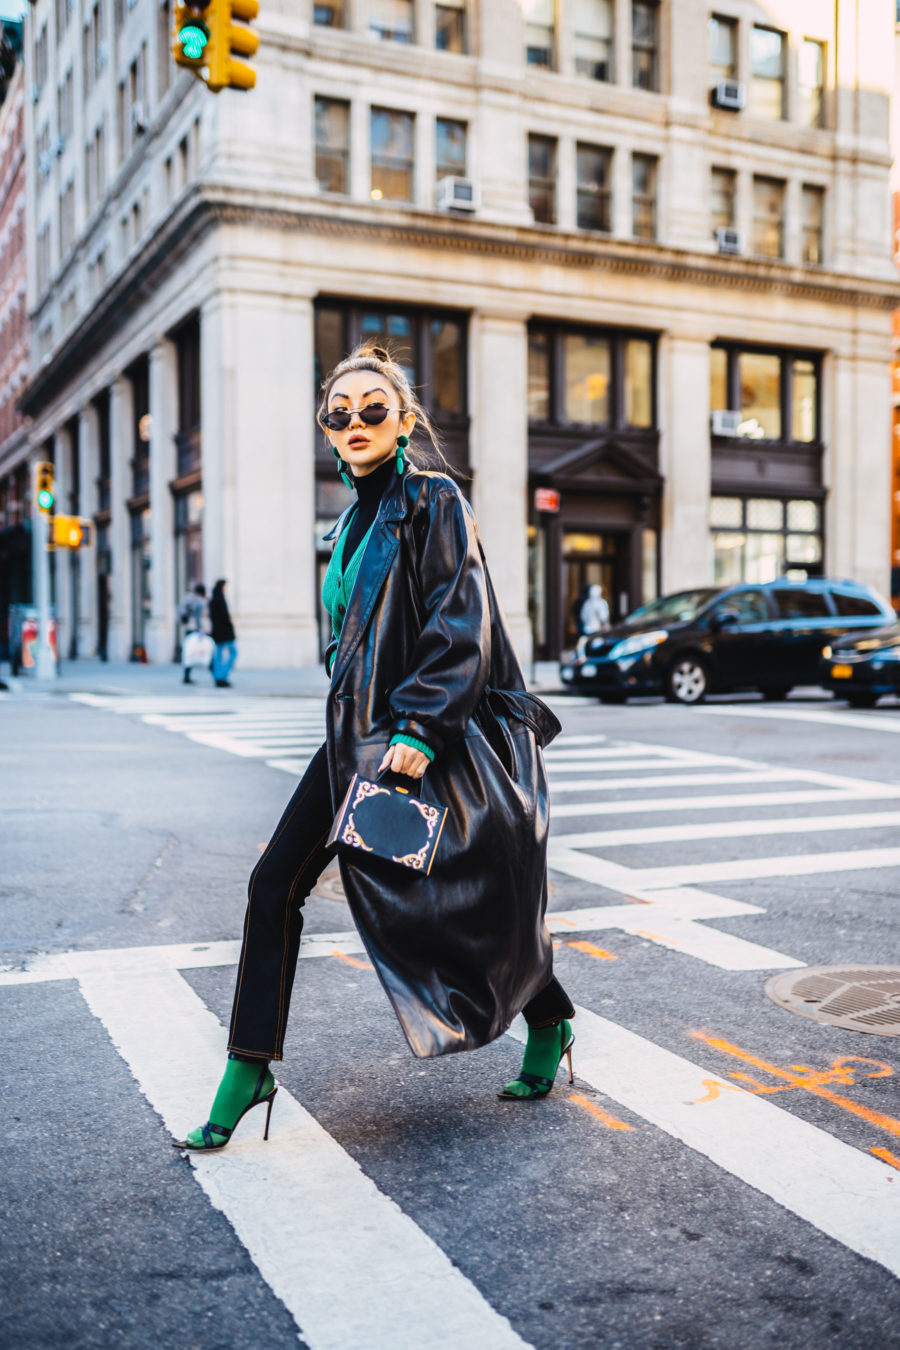 fashion blogger jessica wang shares black friday 2019 sales wearing leather trench coat and socks with sandals // Notjessfashion.com